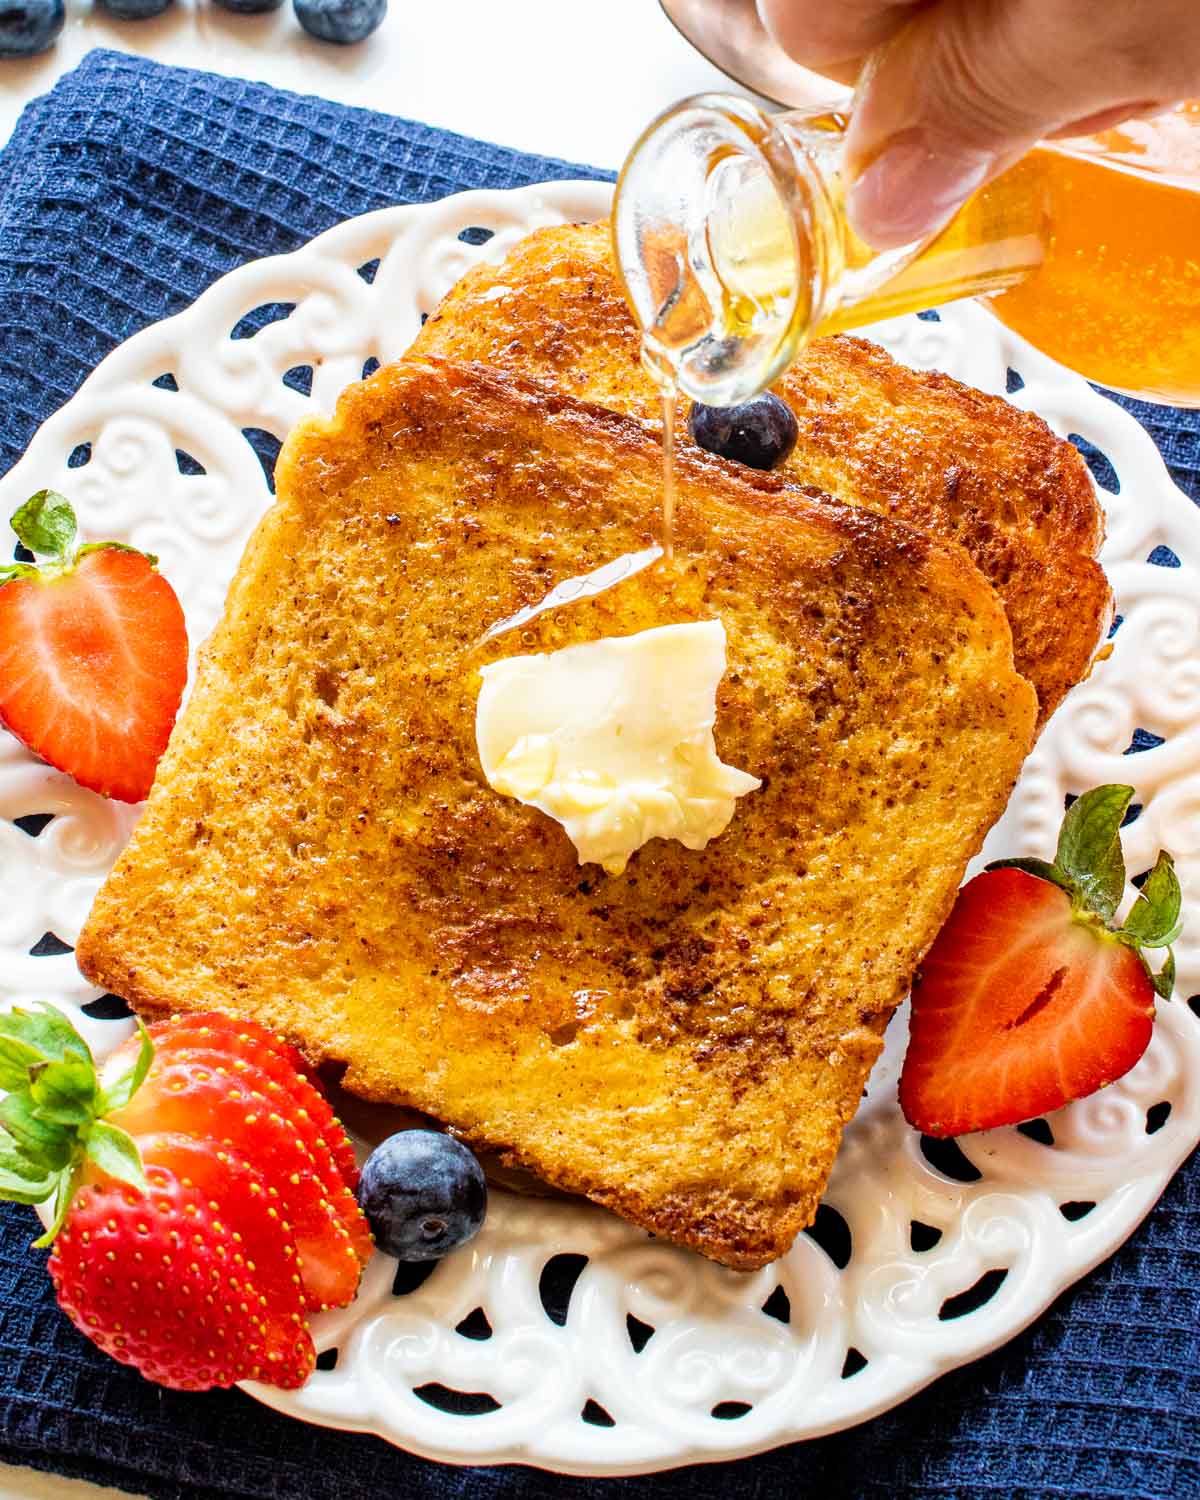 2 slices of french toast on a plate with butter and berries.